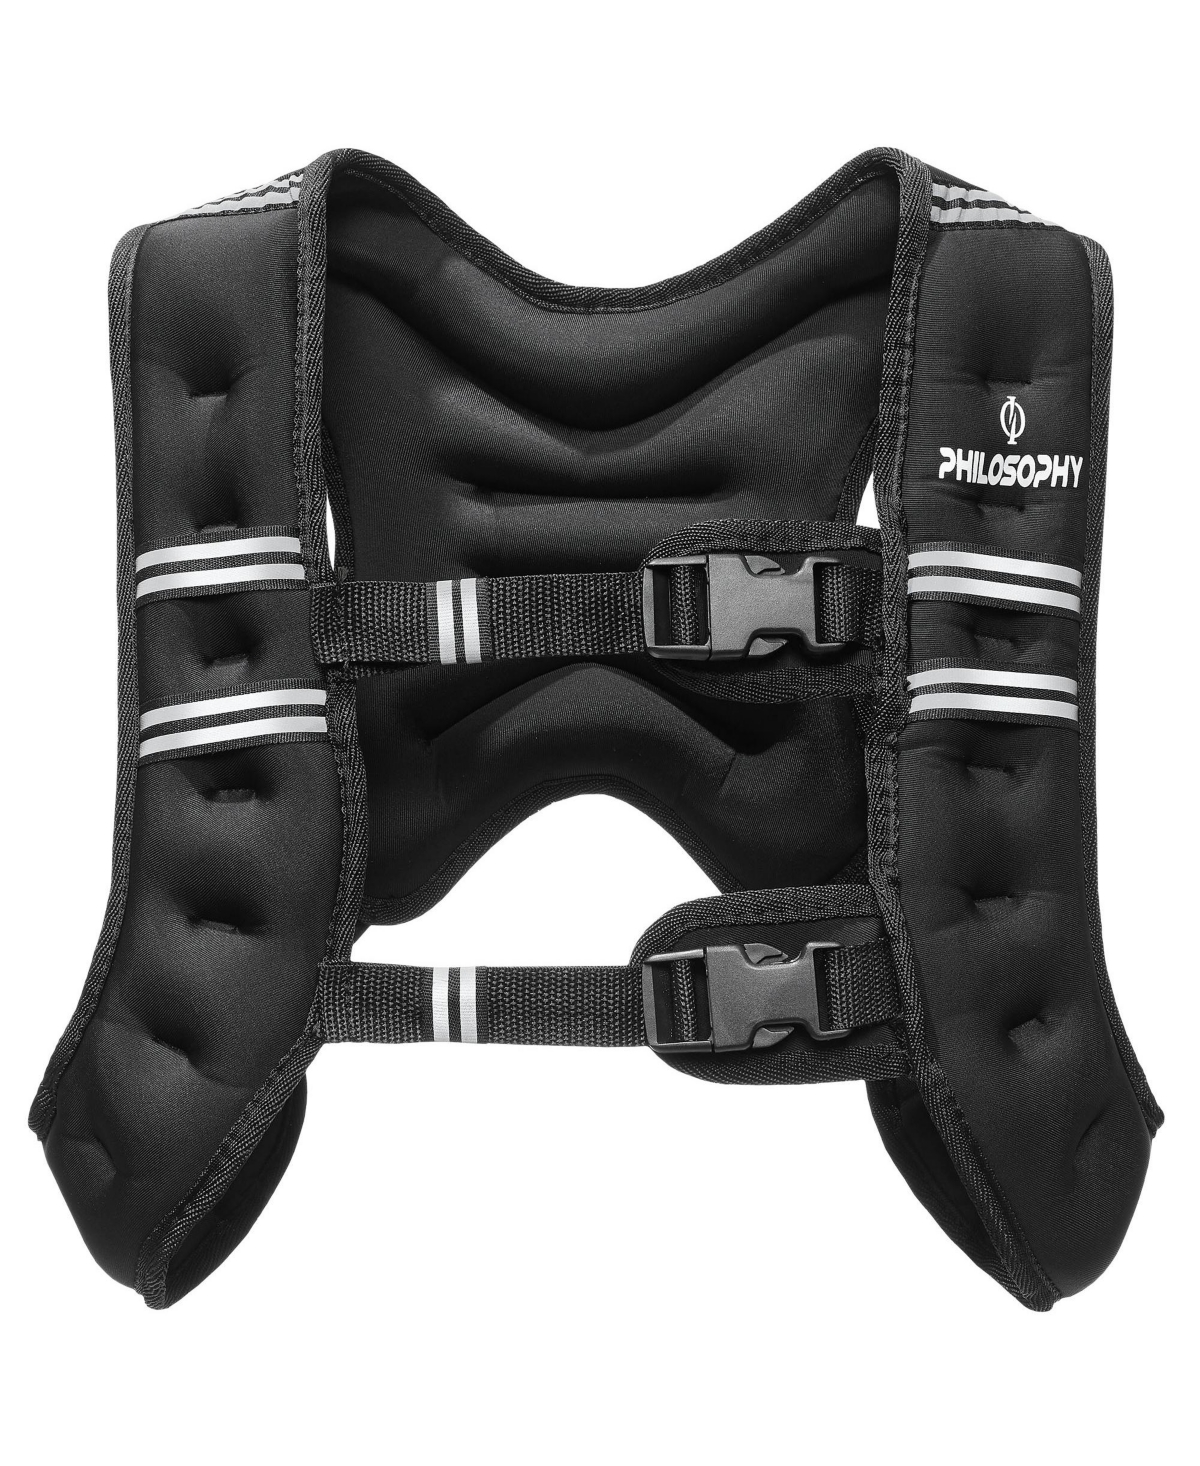 Weighted Workout Vest 8 Lb, Strength Training Fitness Body Weight Vest - Black